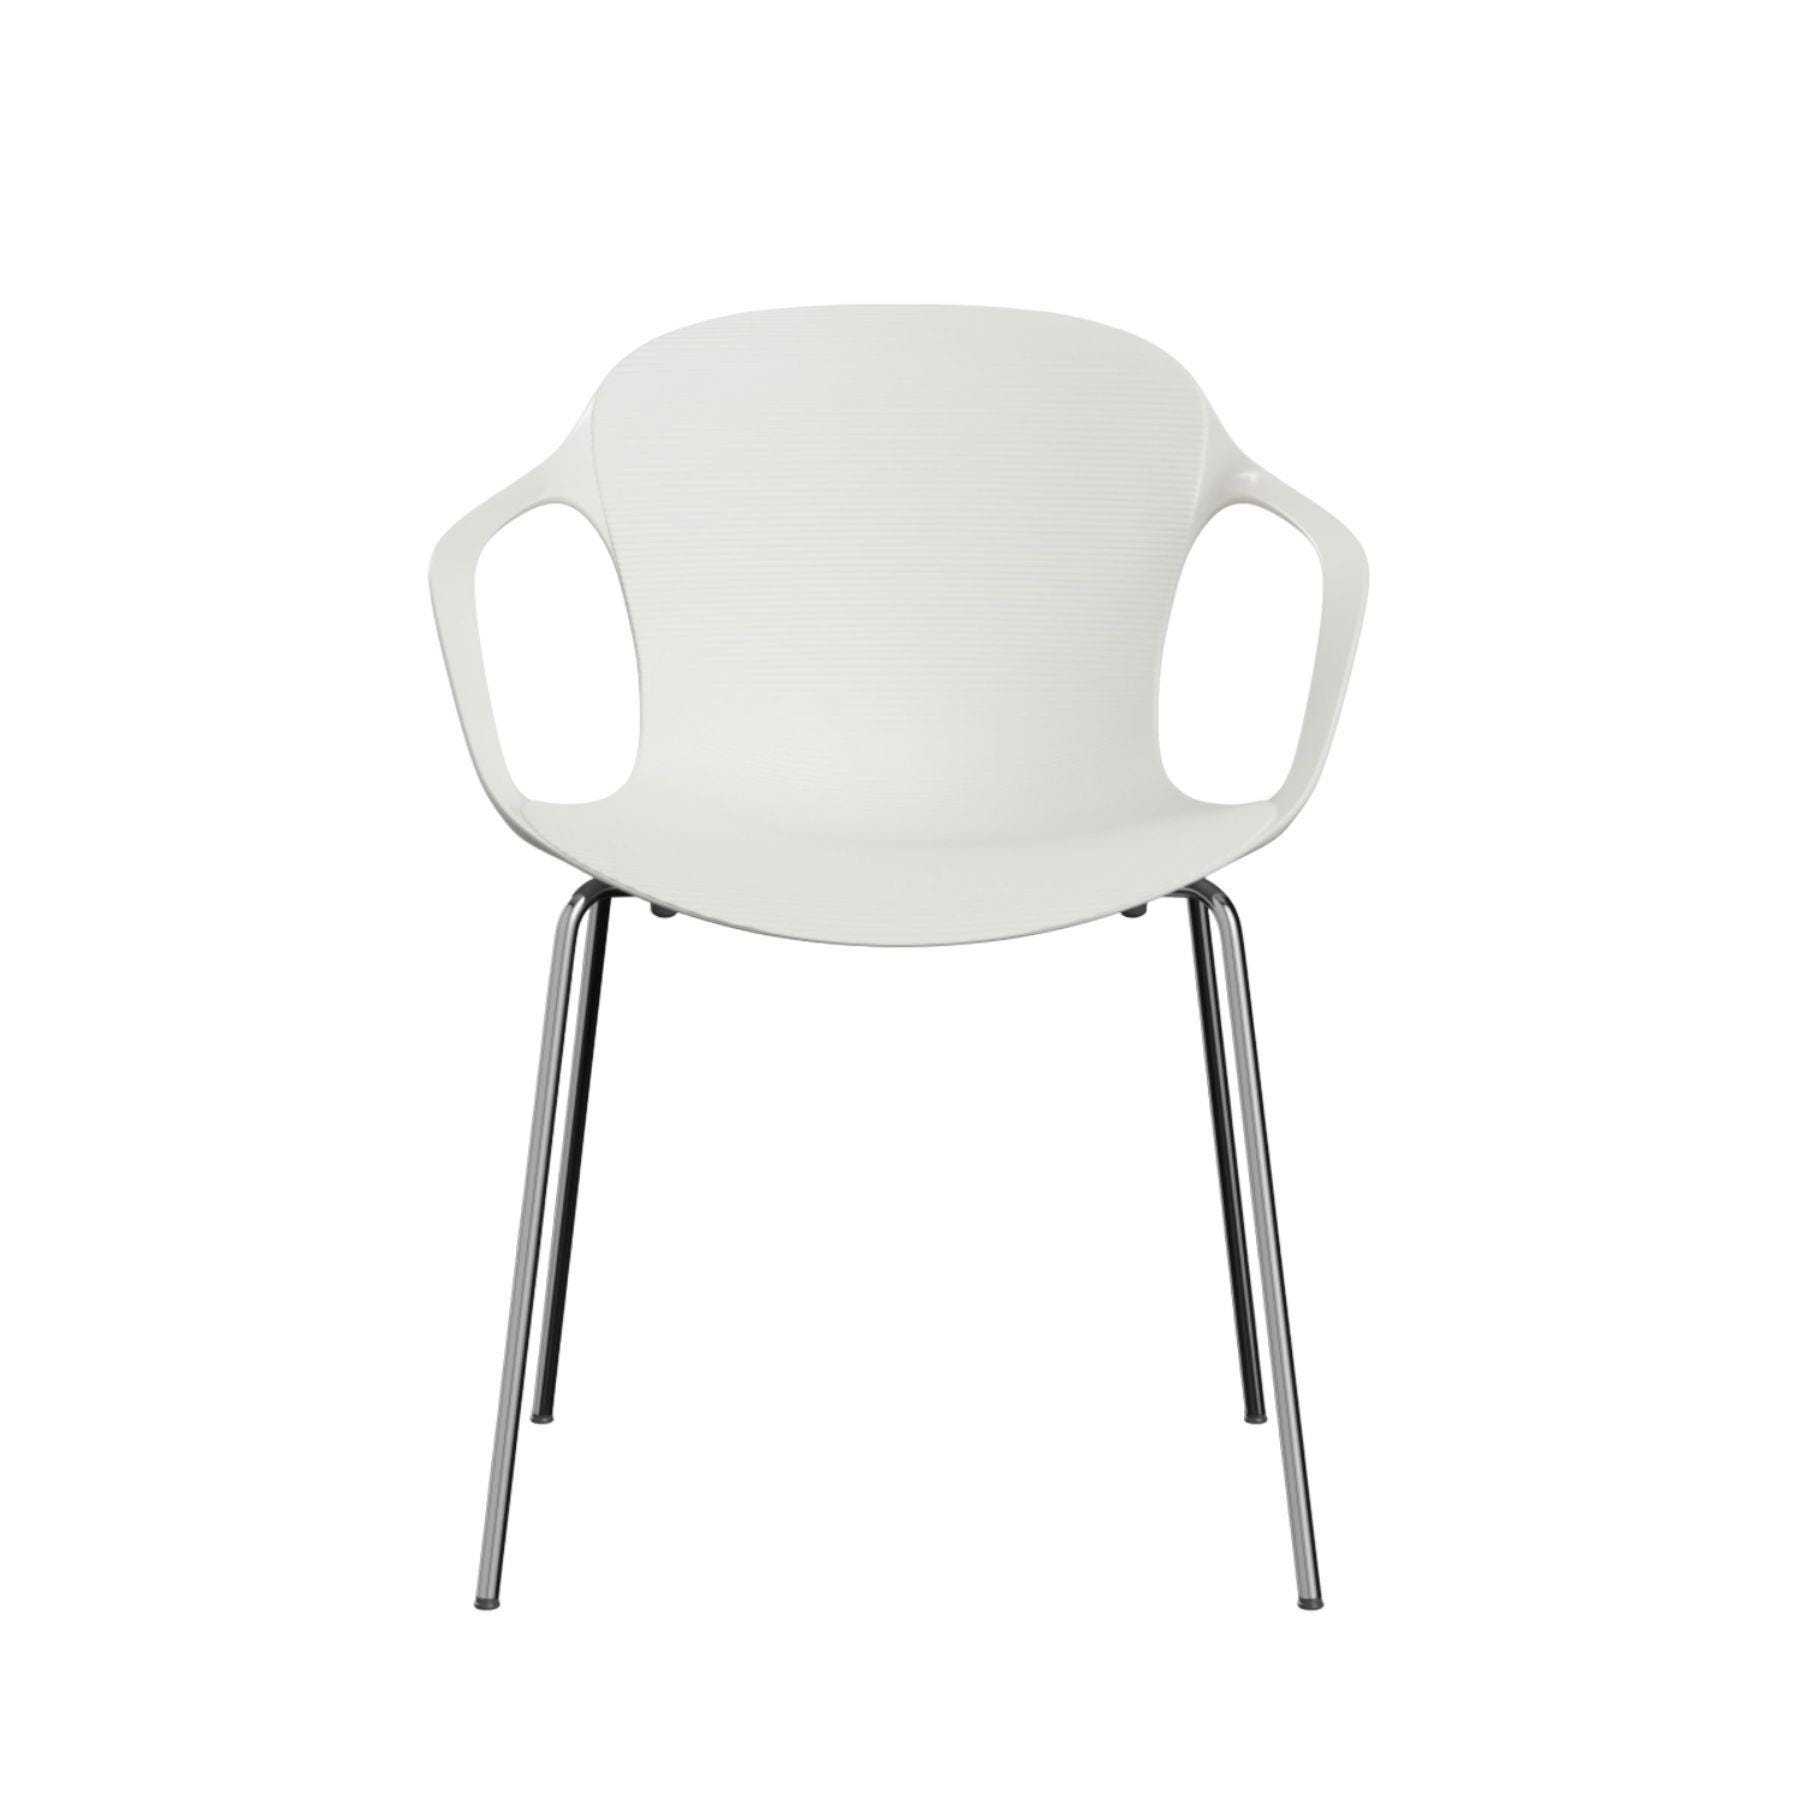 Fritz Hansen Nap Dining Chair Milk White With Arms Chrome Base White Designer Furniture From Holloways Of Ludlow